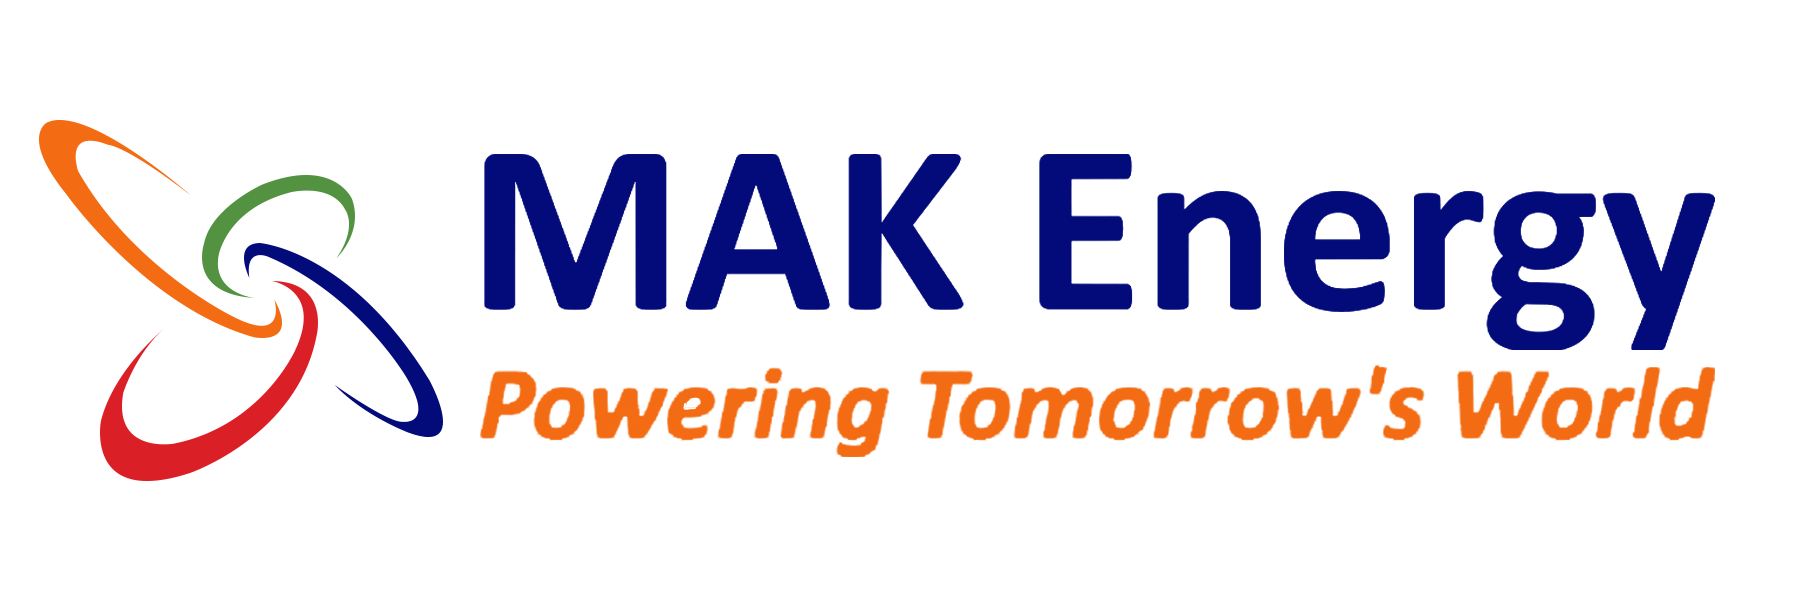 MAK Energy Ltd - Solar PV and Thermal Energy Company in Essex and London